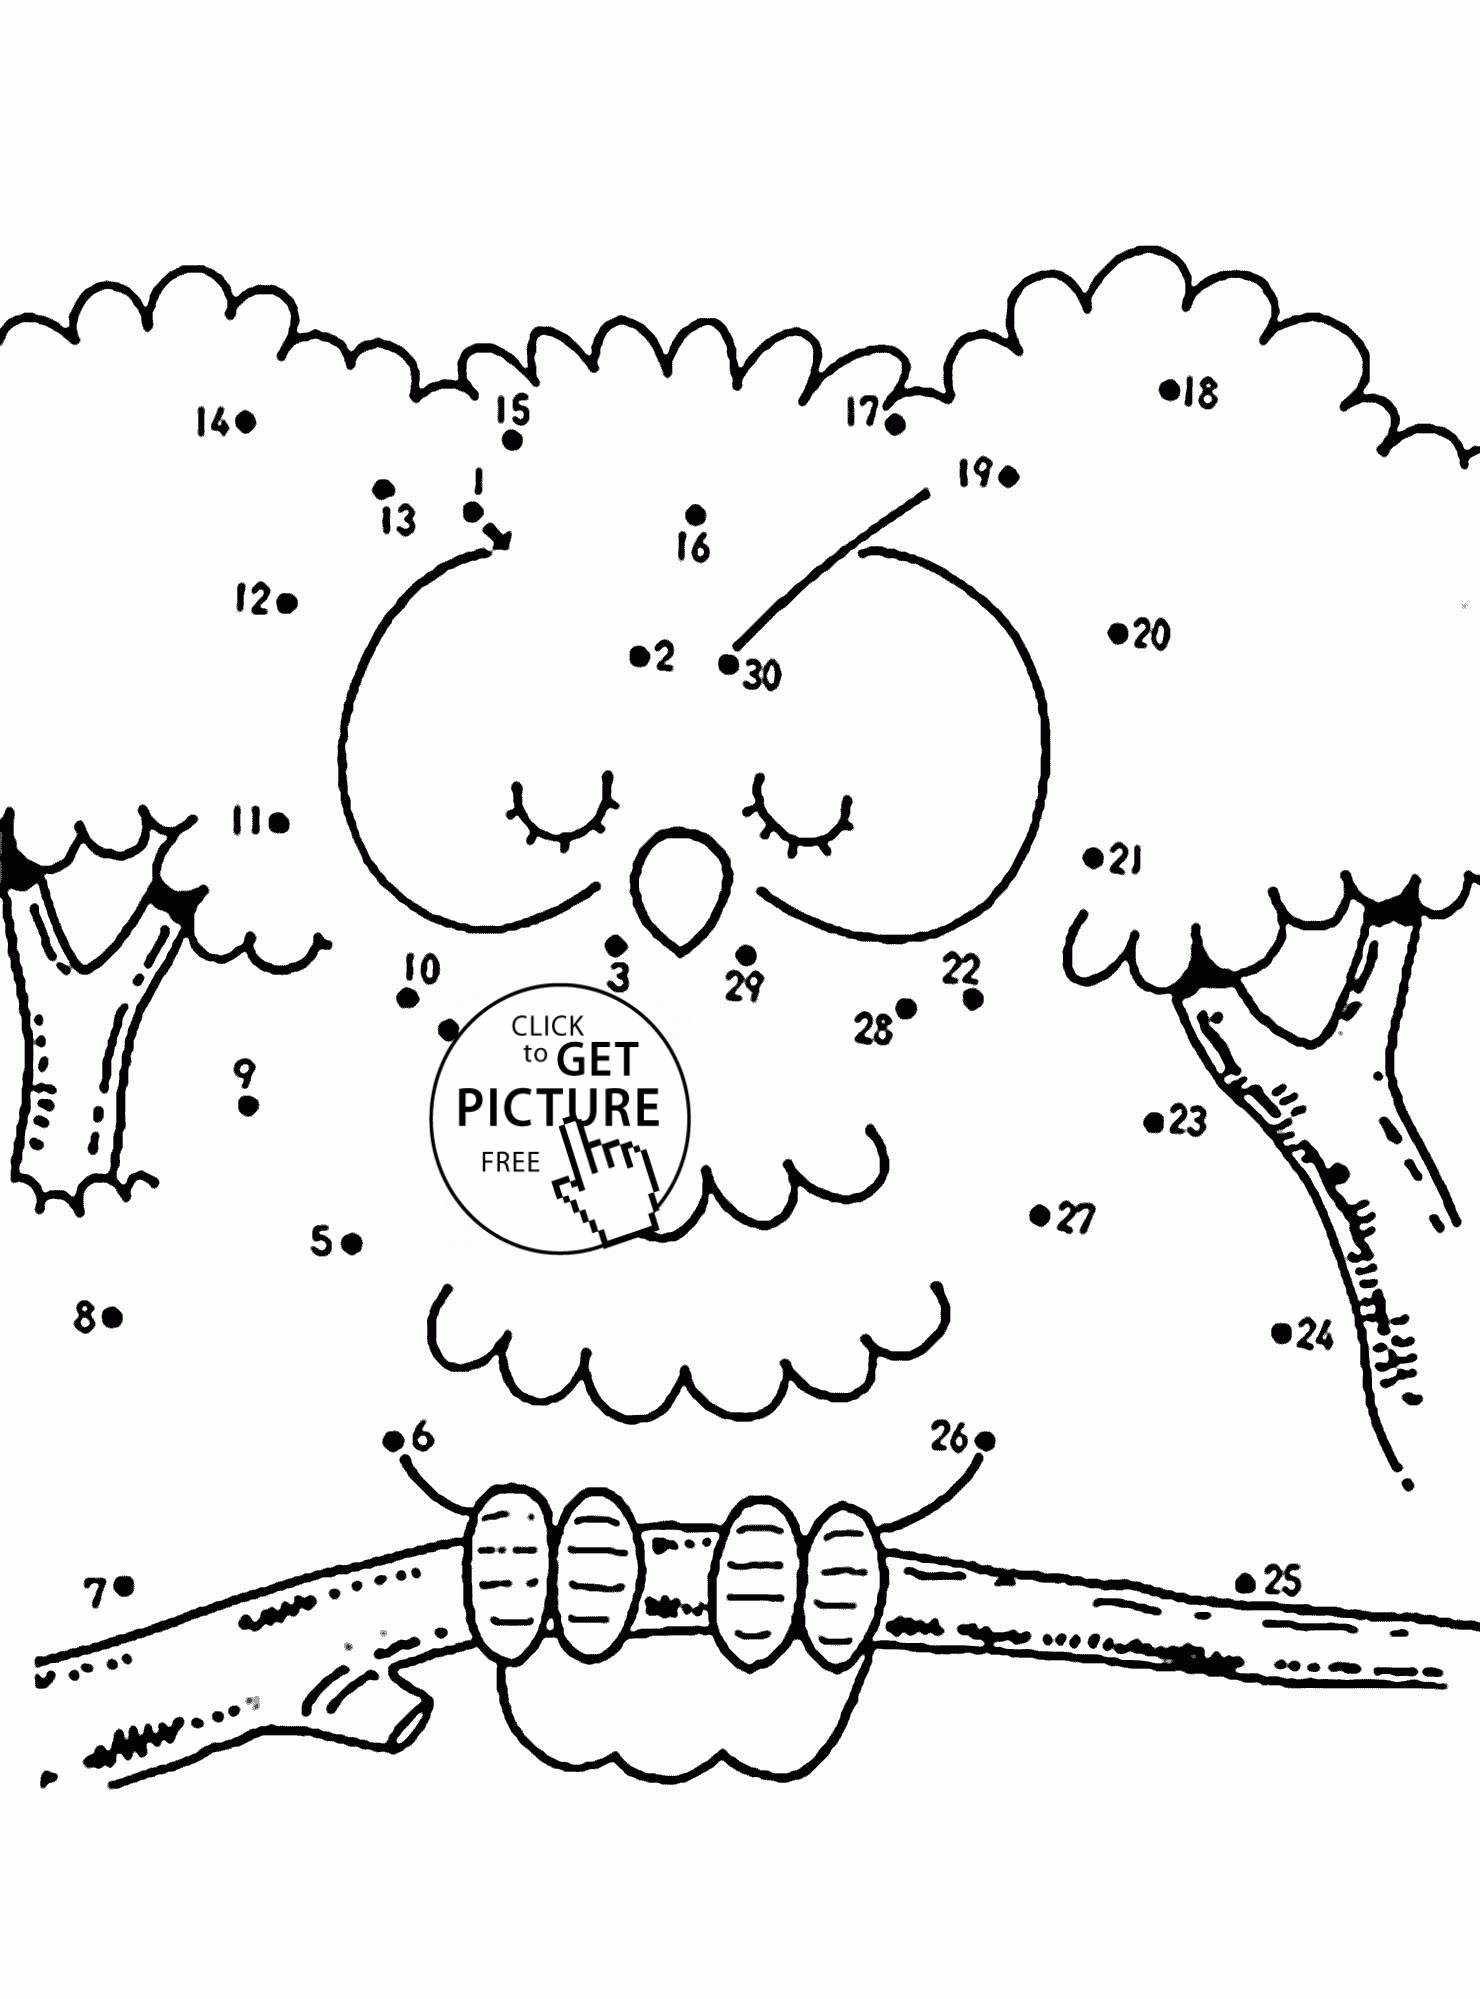 Download Extreme Dot To Dots Coloring Pages - Coloring Home